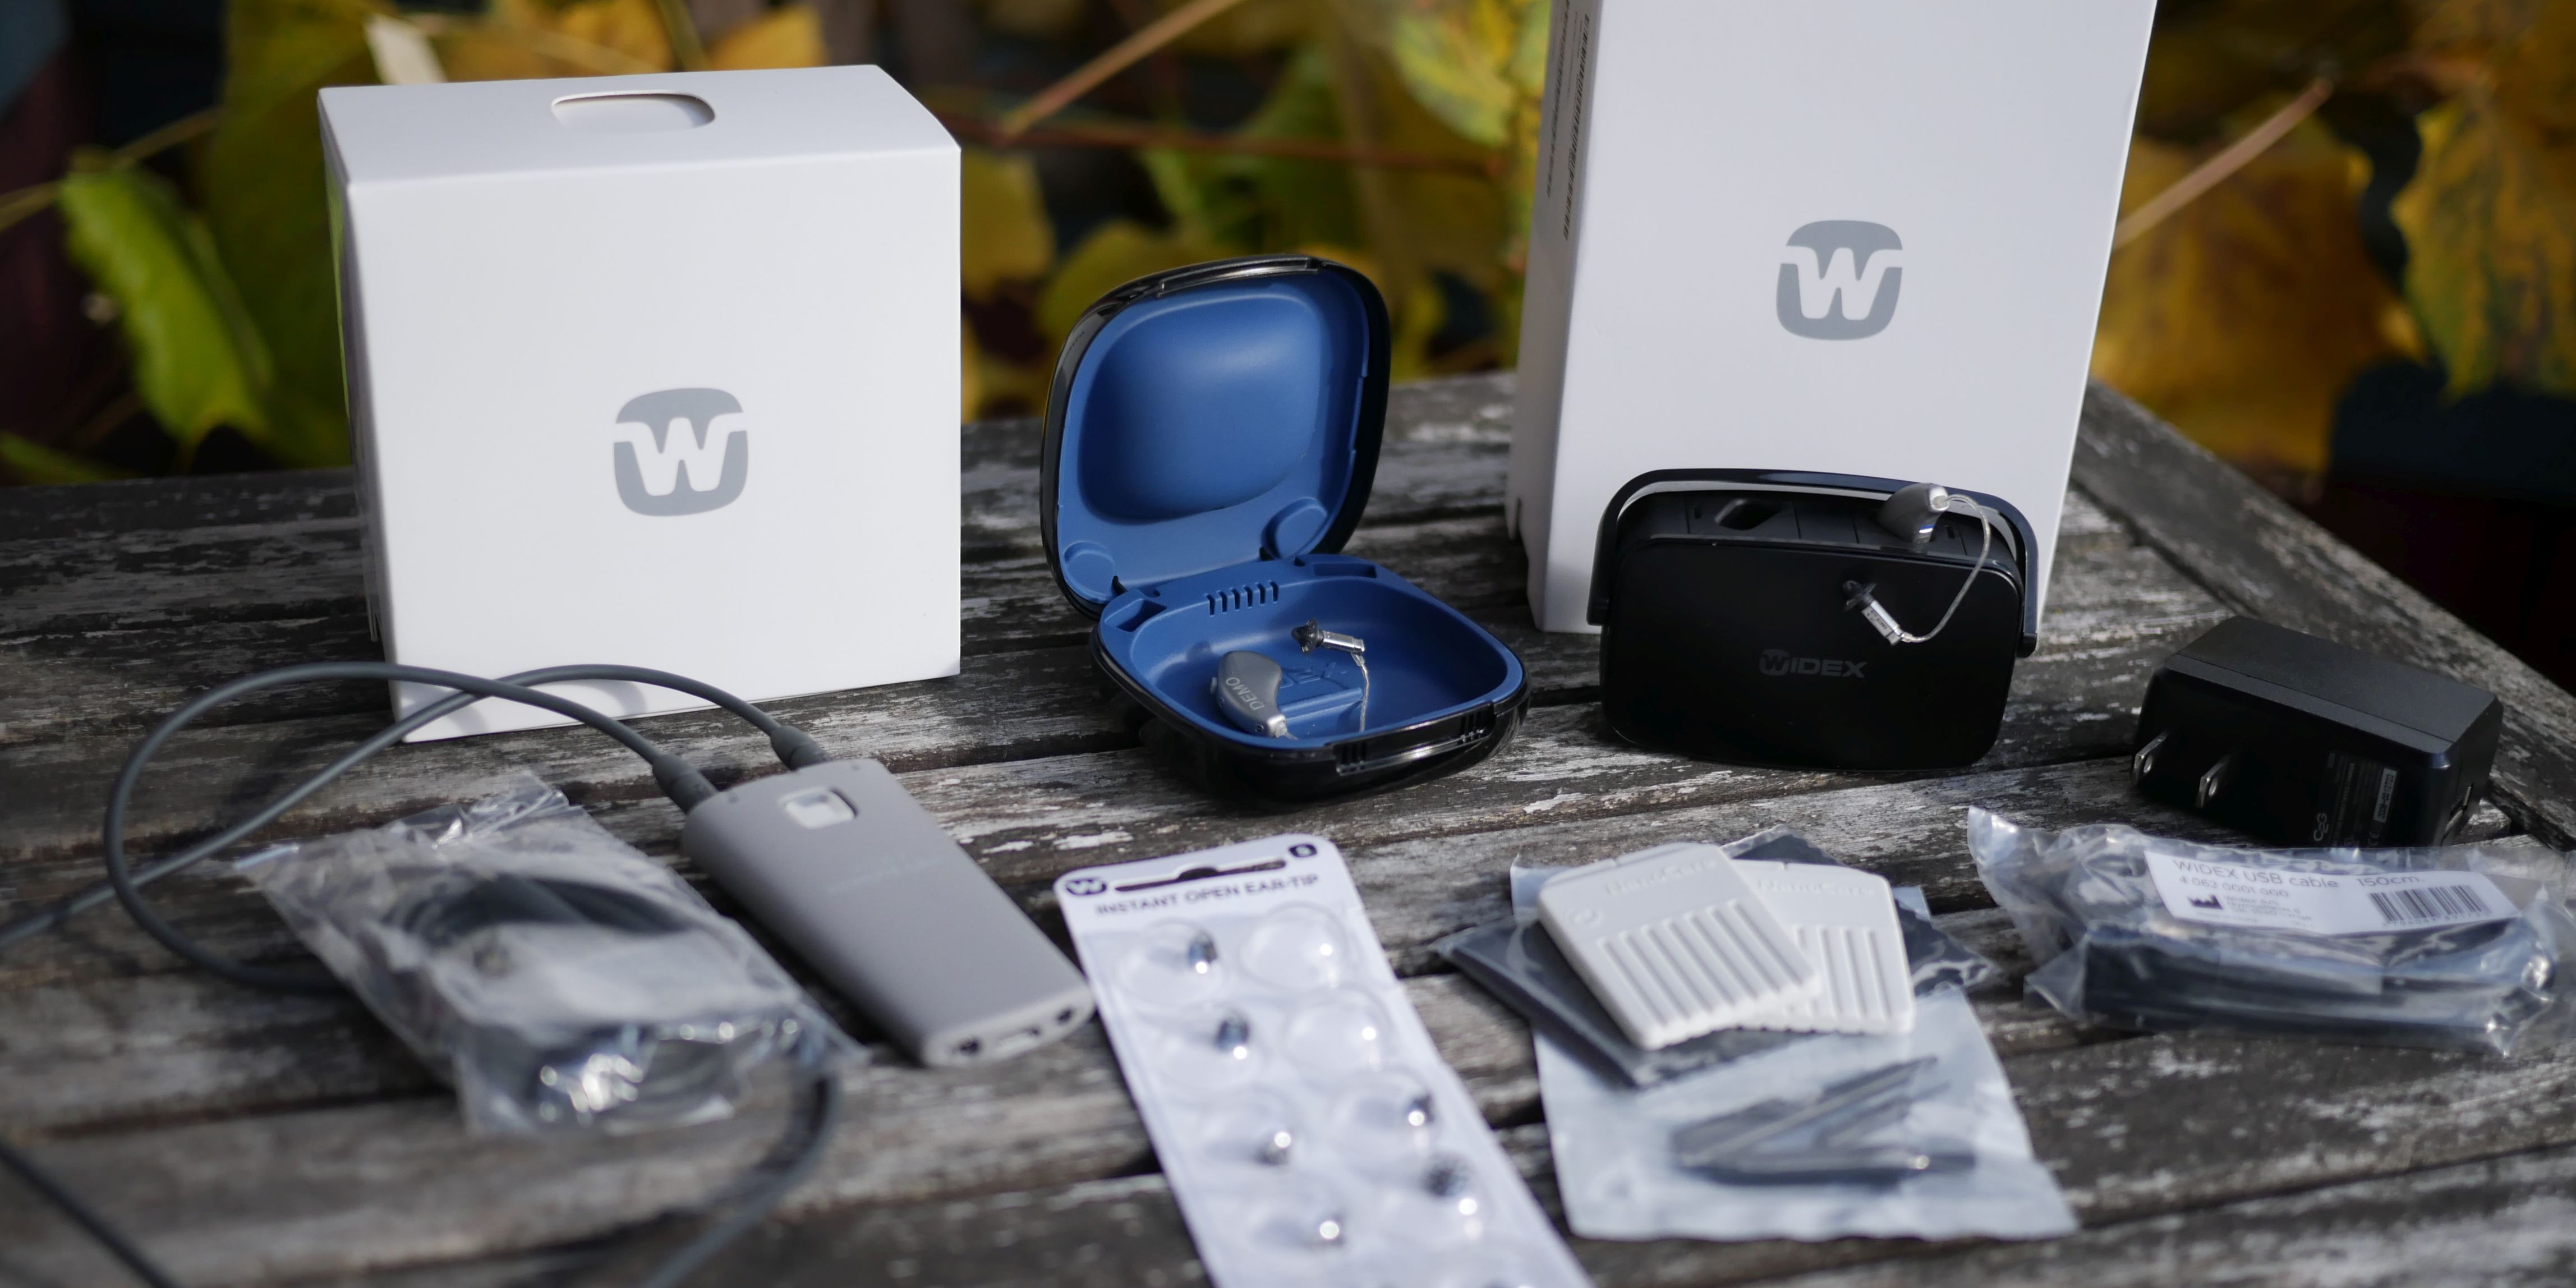 Widex Moment hearing aids and remote link unboxed